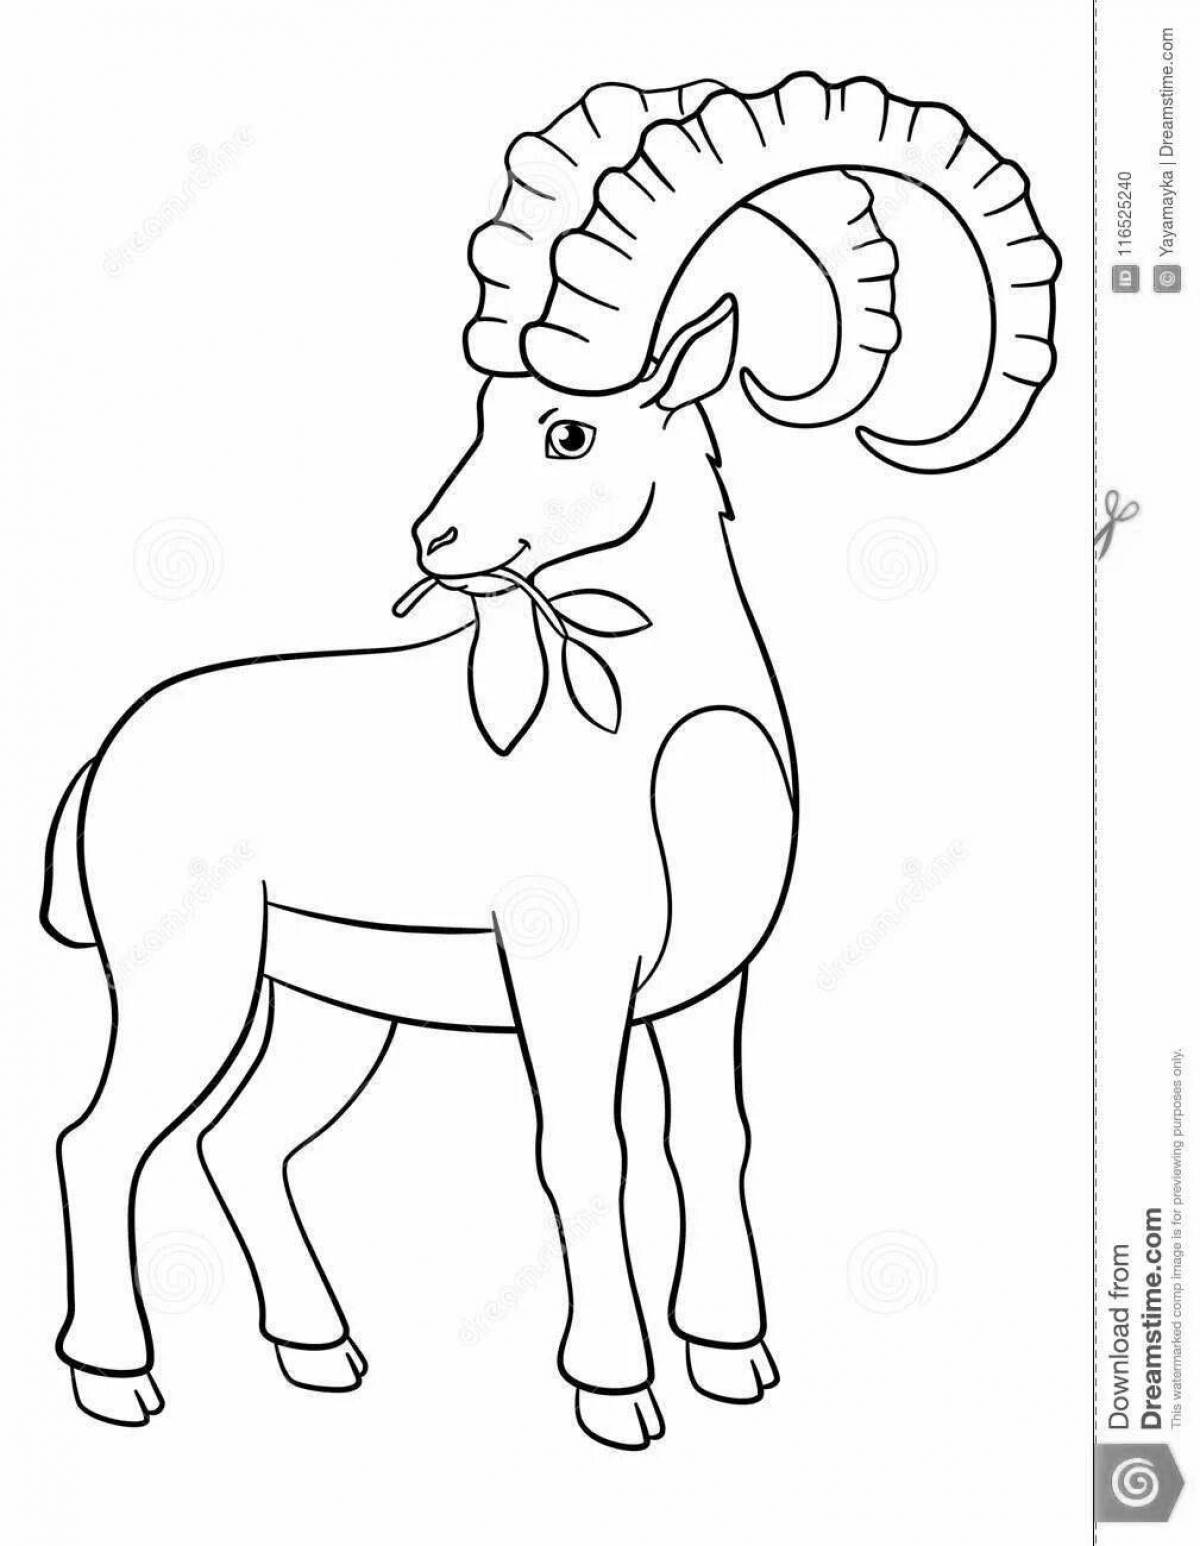 Colorful mountain goat coloring page